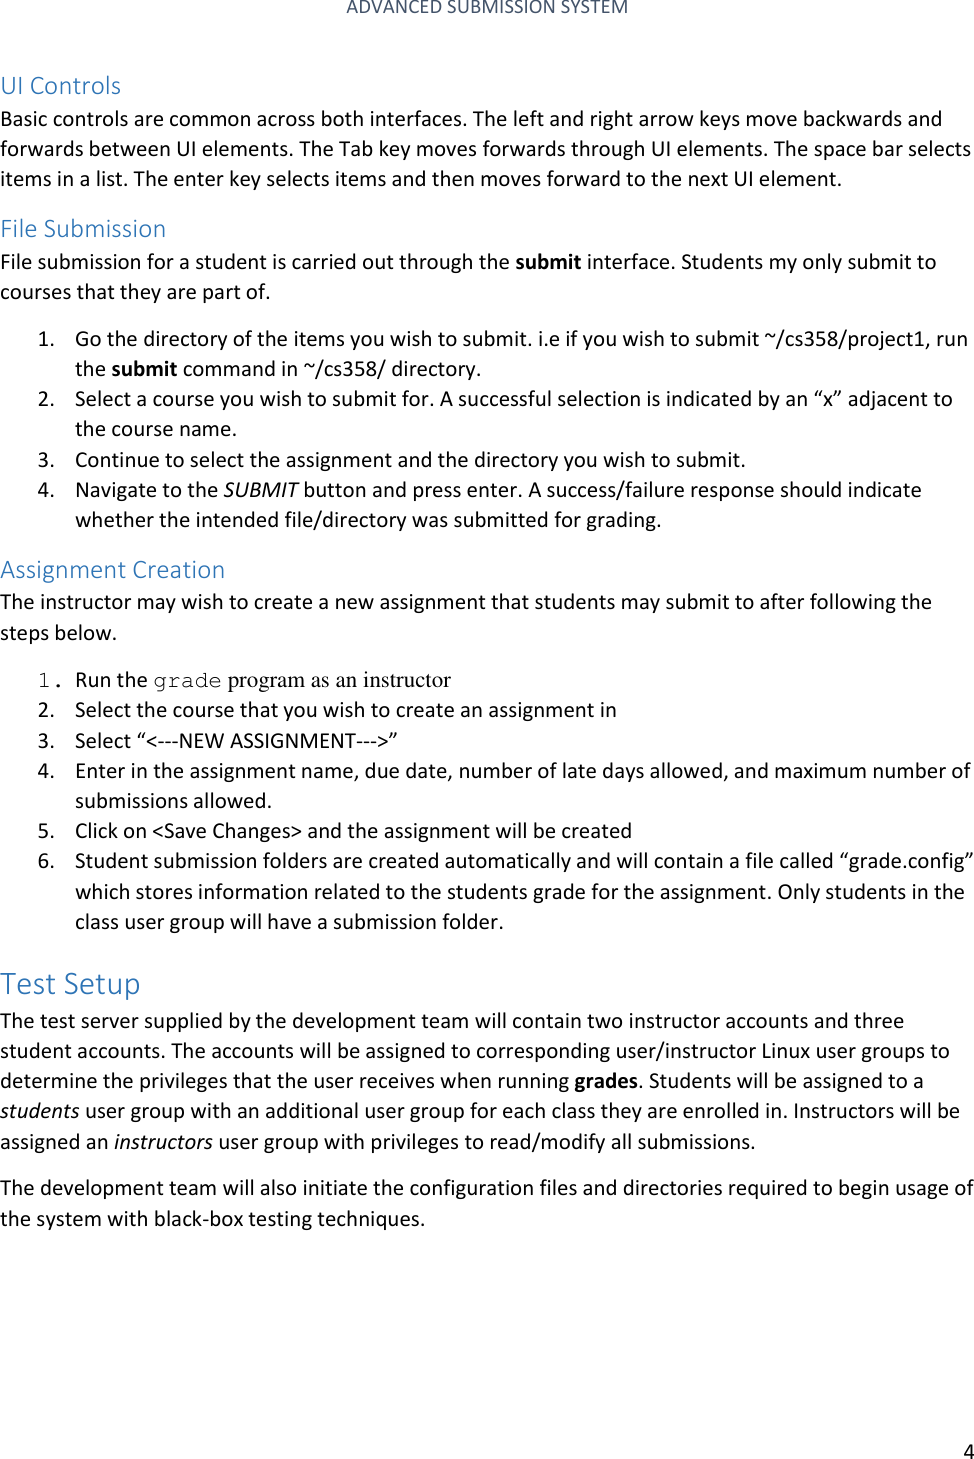 Page 5 of 6 - Advanced Submission System Product Ing Instructions